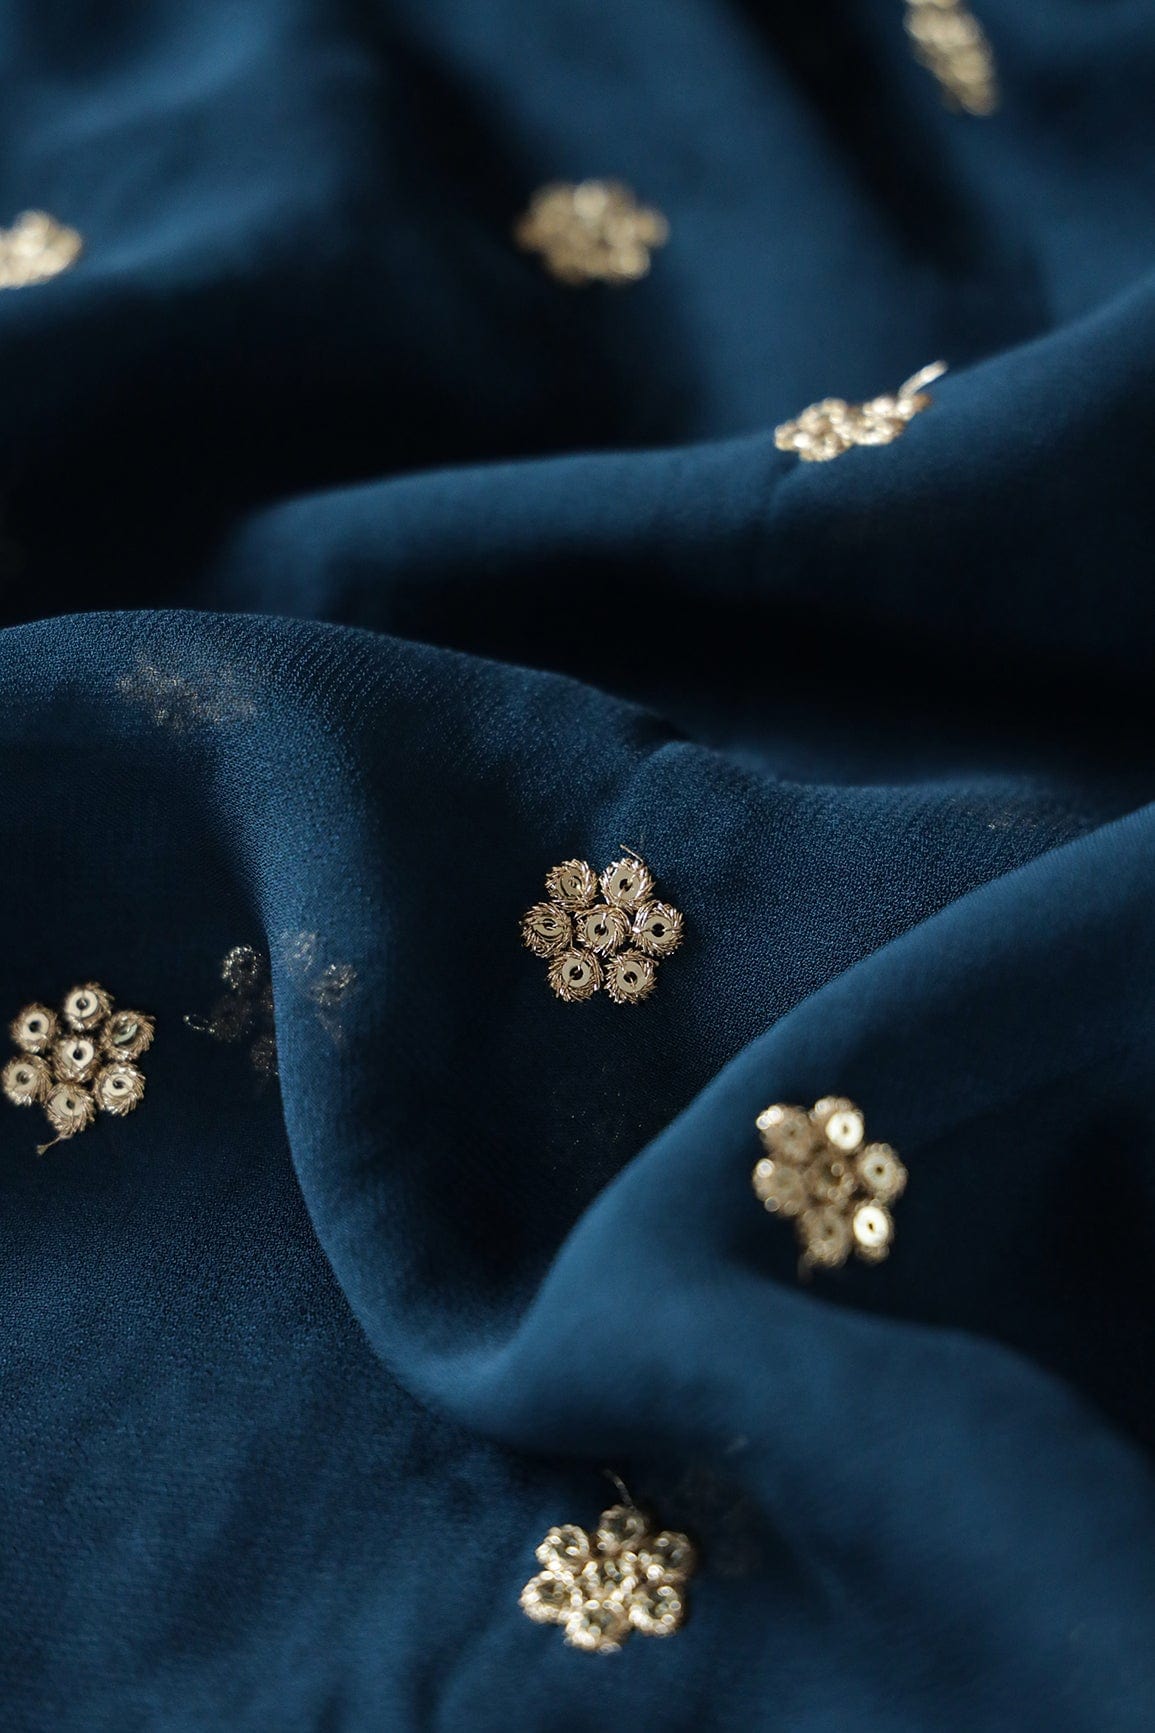 doeraa Embroidery Fabrics Gold Sequins With Gold Zari Small Motif Embroidery Work On Prussian Blue Viscose Georgette Fabric